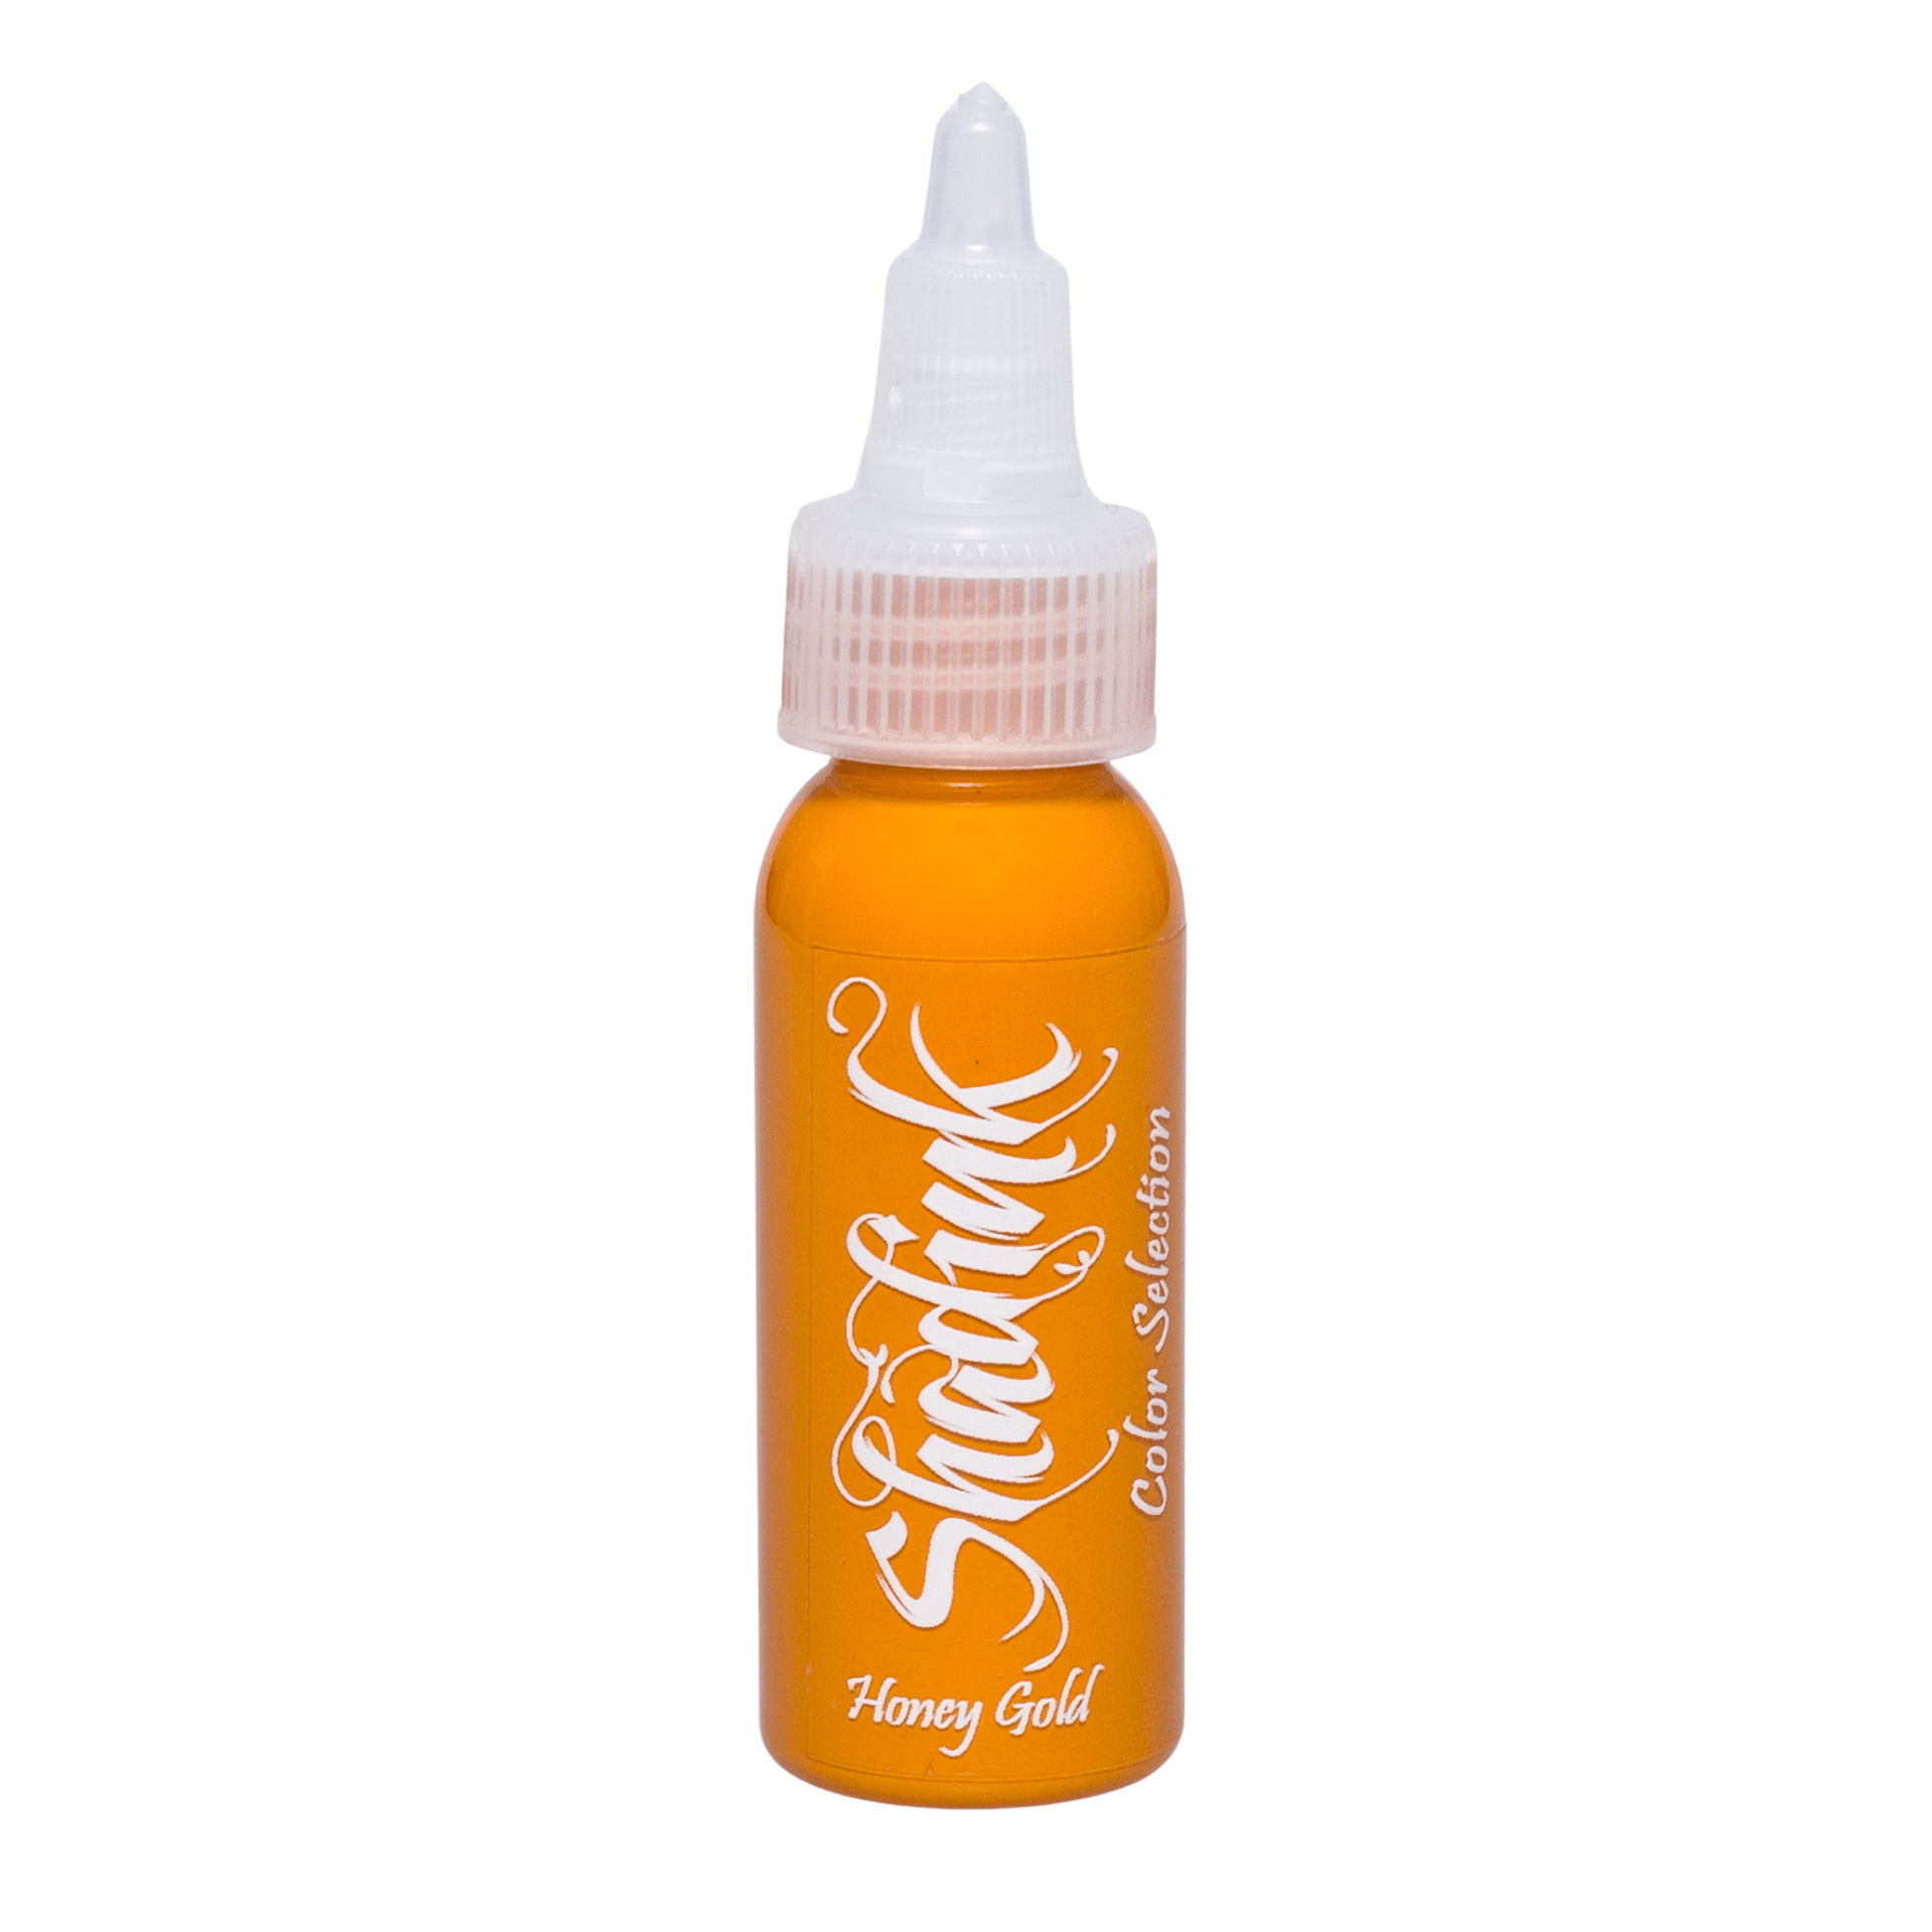 Shadink Sélection Couleur 1/2oz - Lucifer Tattoo Supply